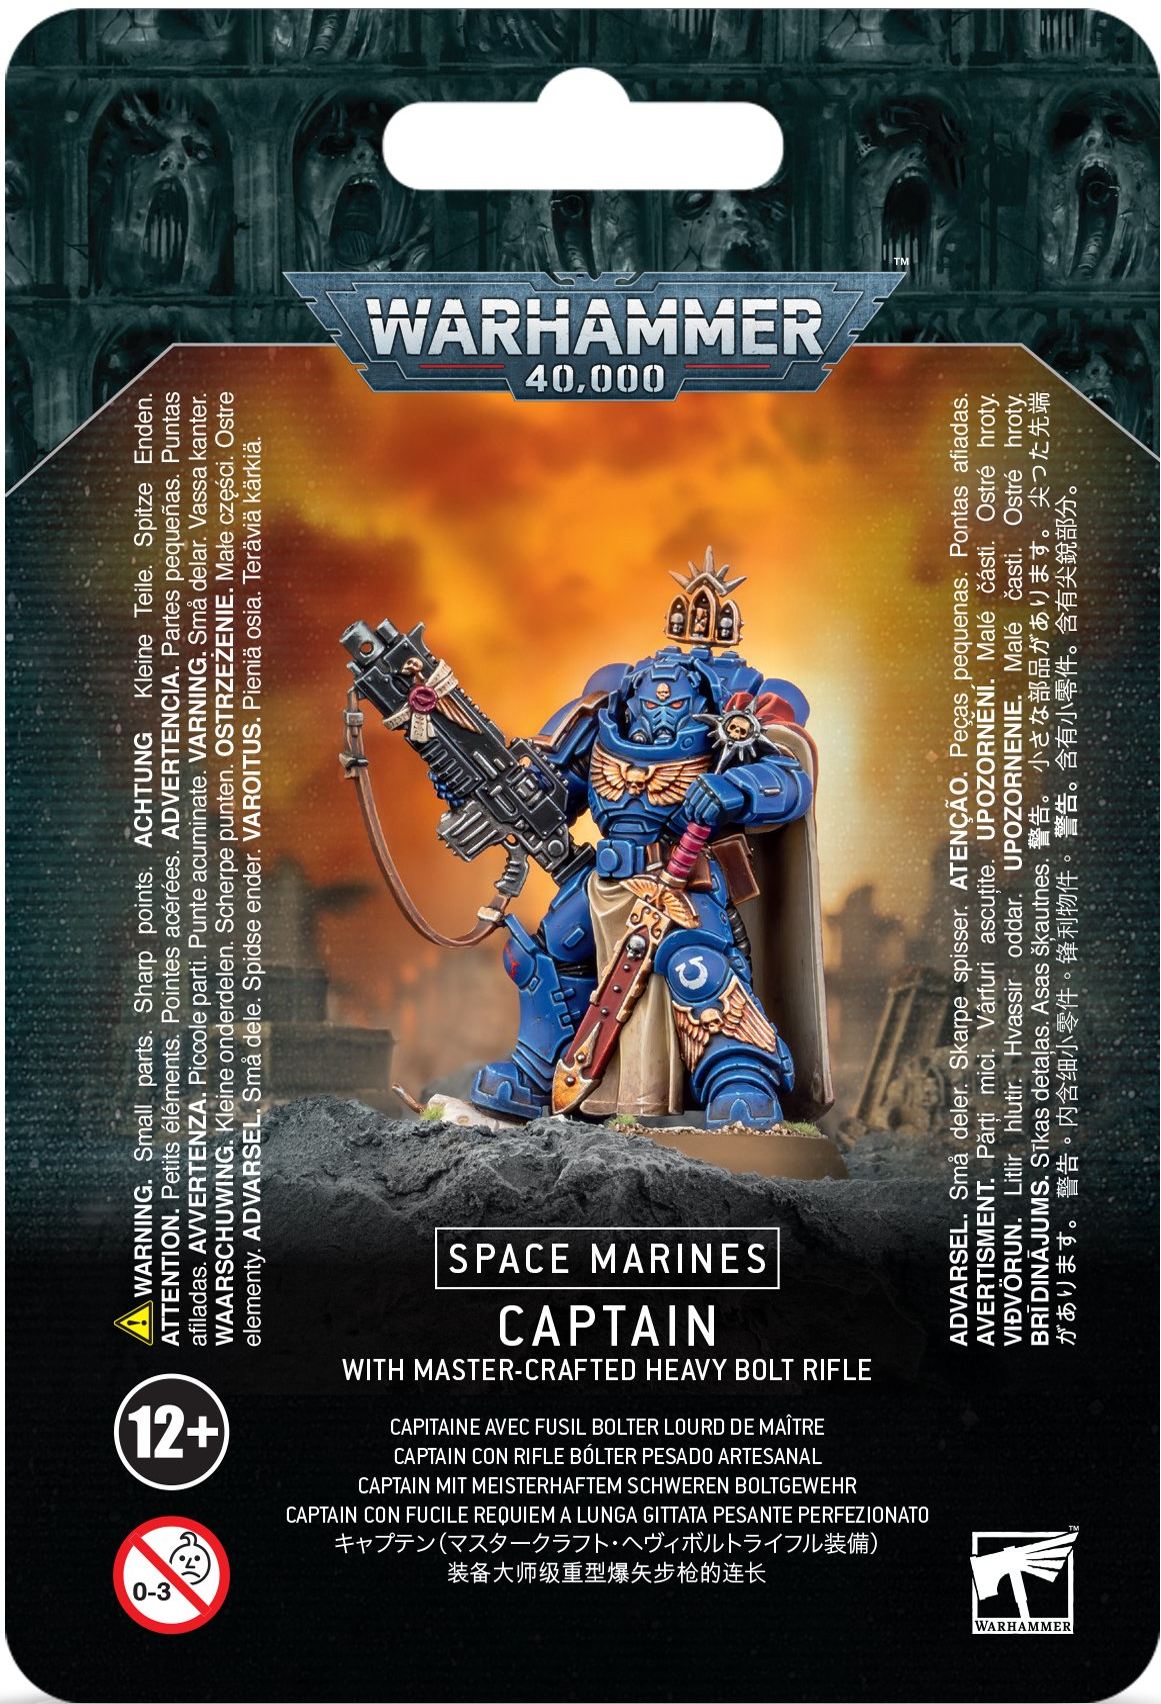 Warhammer 40,000: Space Marines- Captain with Master-crafted Heavy Bolt Rifle